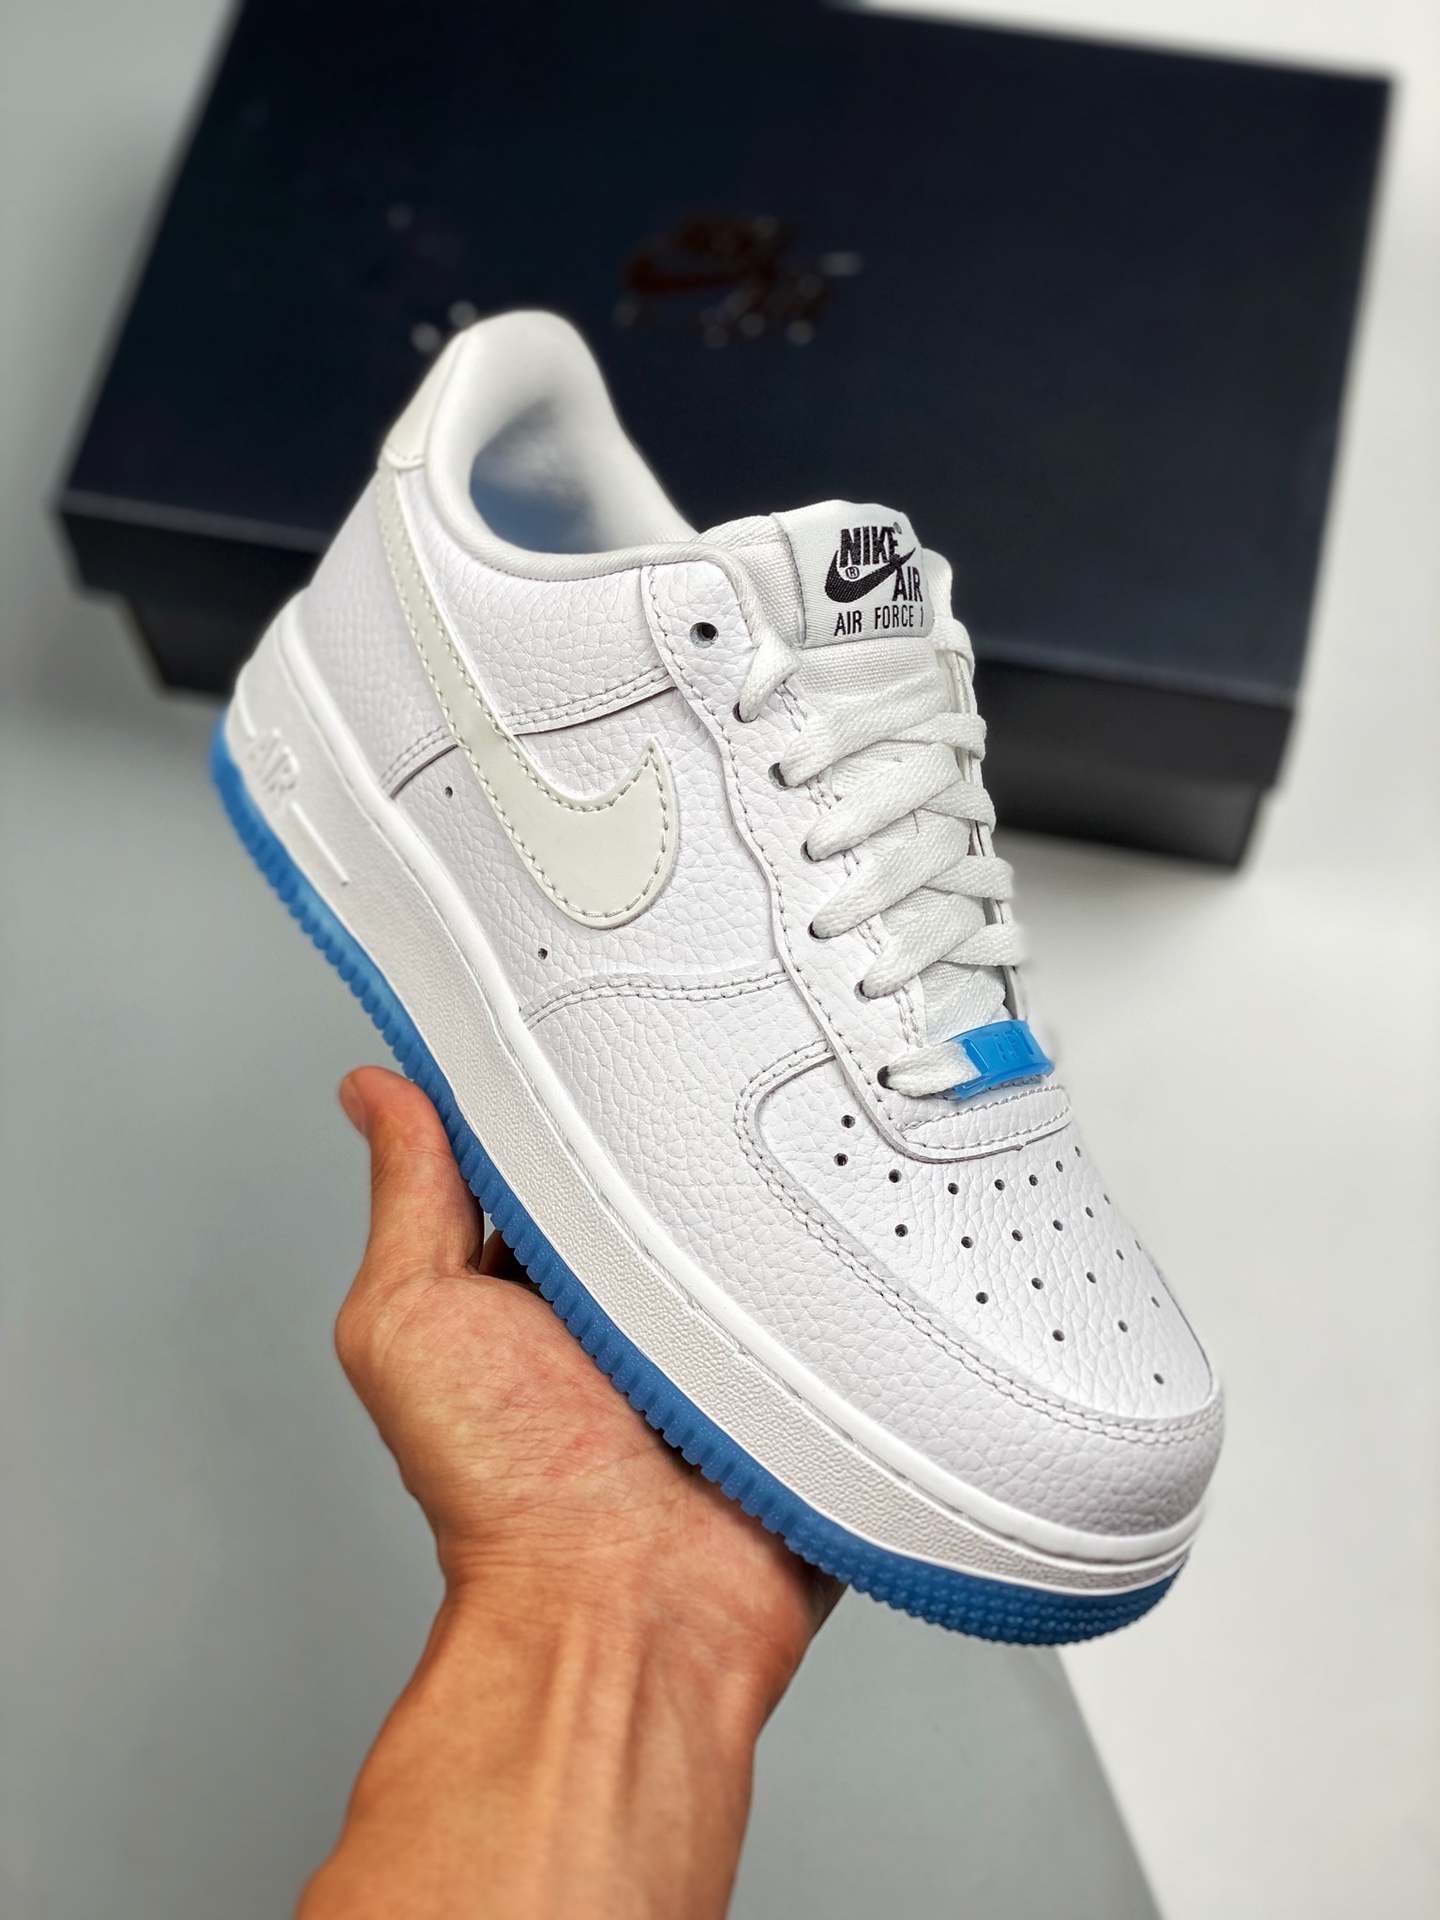 Nike Air Force 1 Low ‘UV’ White University Blue For Sale – Sneaker Hello